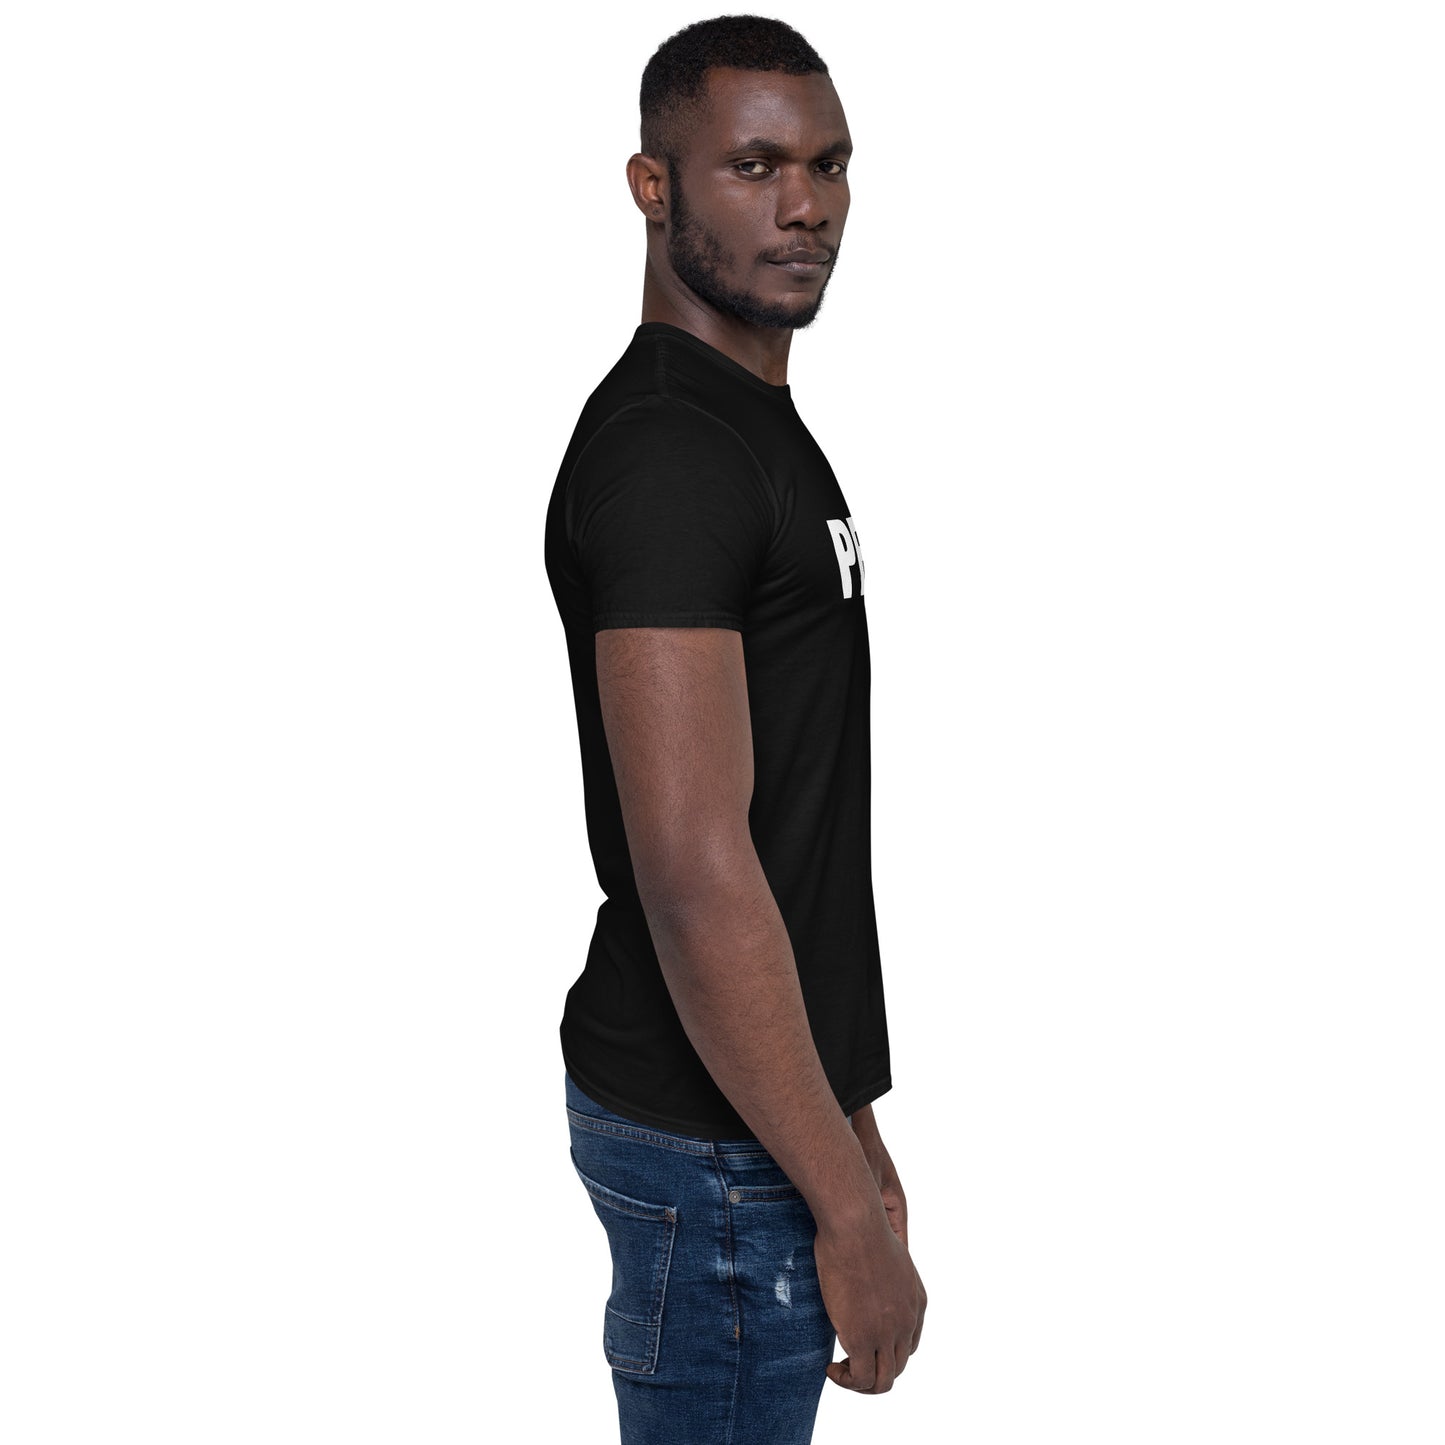 Short-Sleeve Unisex T-Shirt "PERFECT AS YOU ARE" black